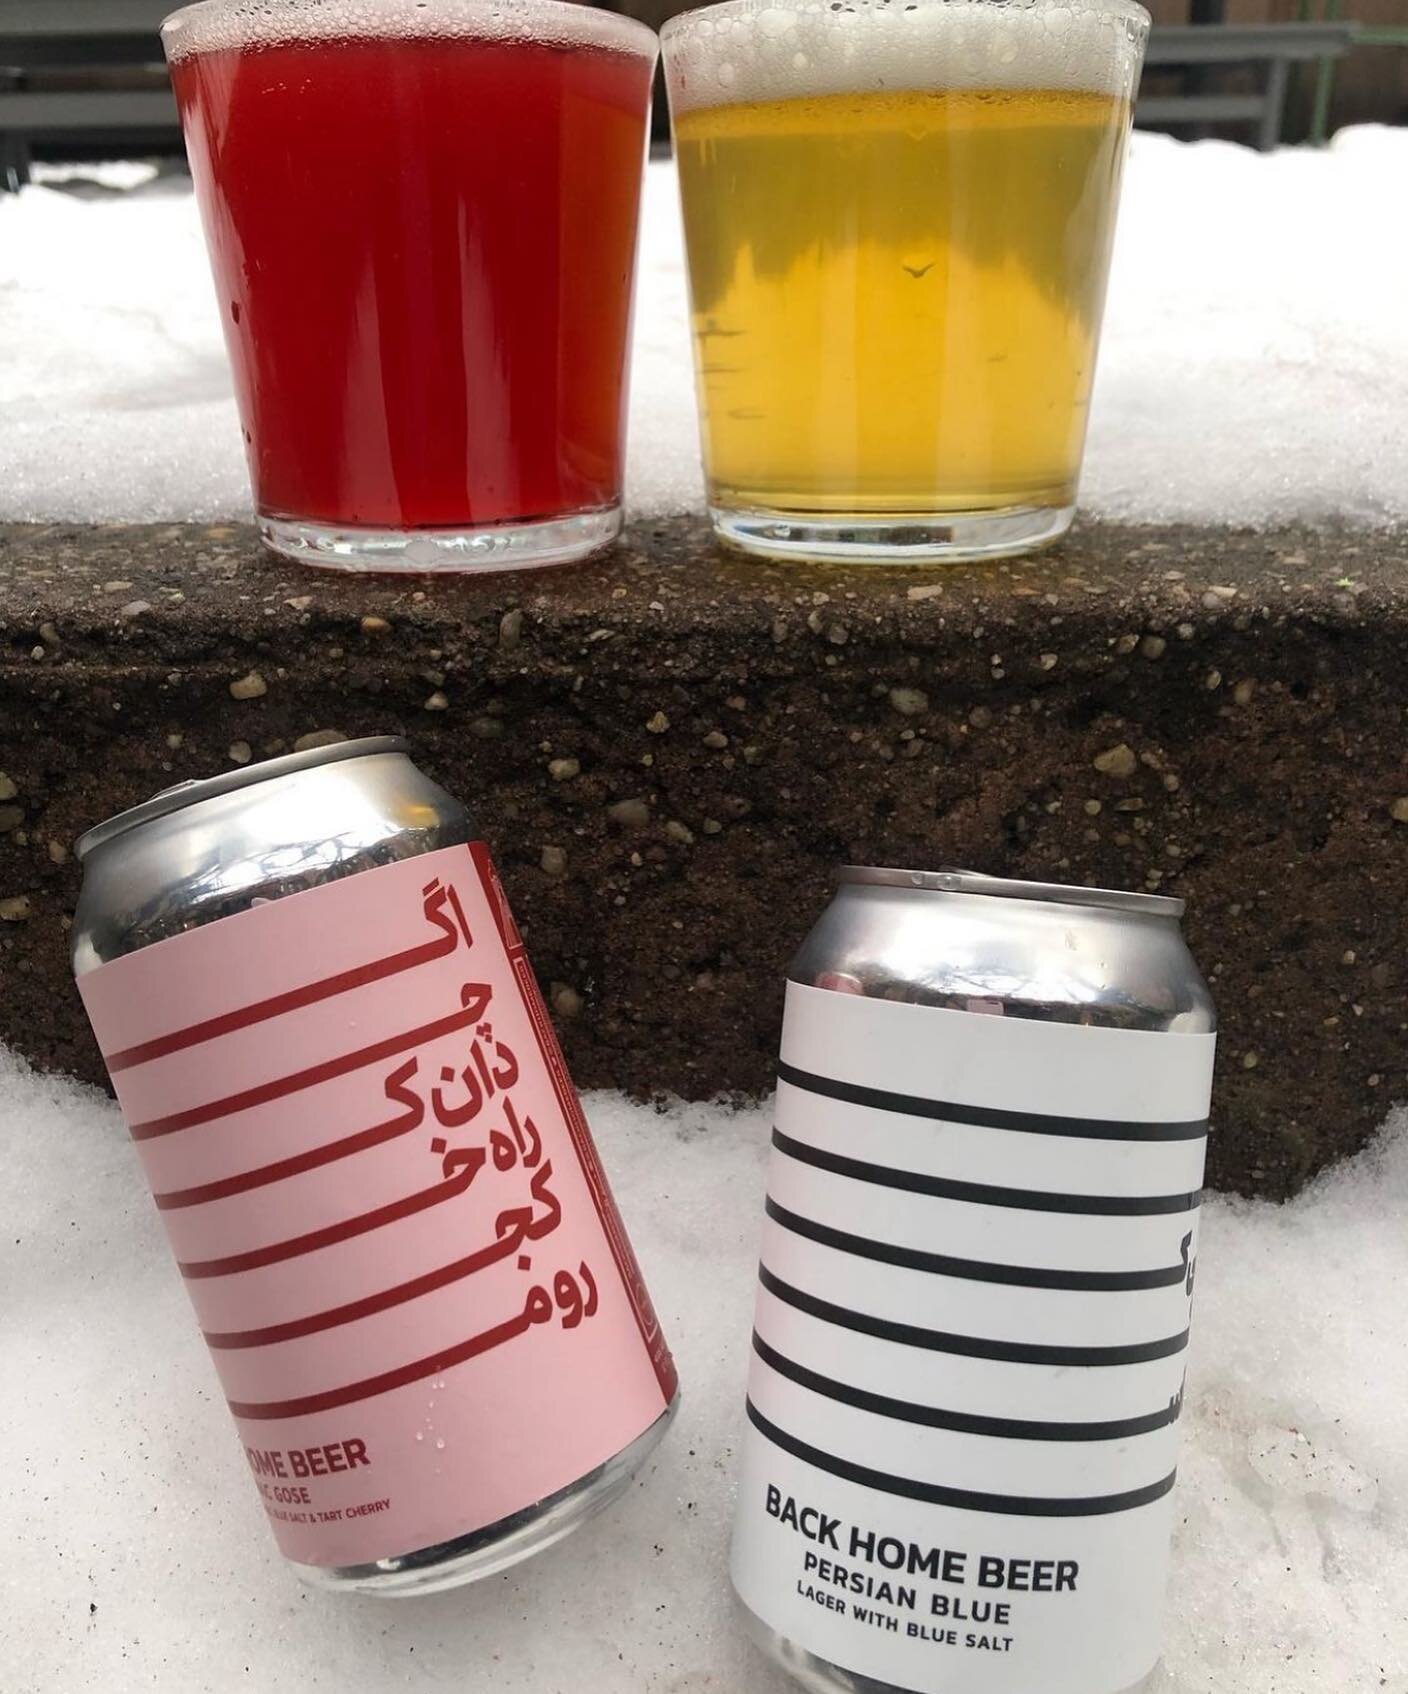 Bringing you the coolness you need on this 🥵 day! @backhomebeer available at Union Market location! #womanownedbusiness #summerdrinks #craftbeer